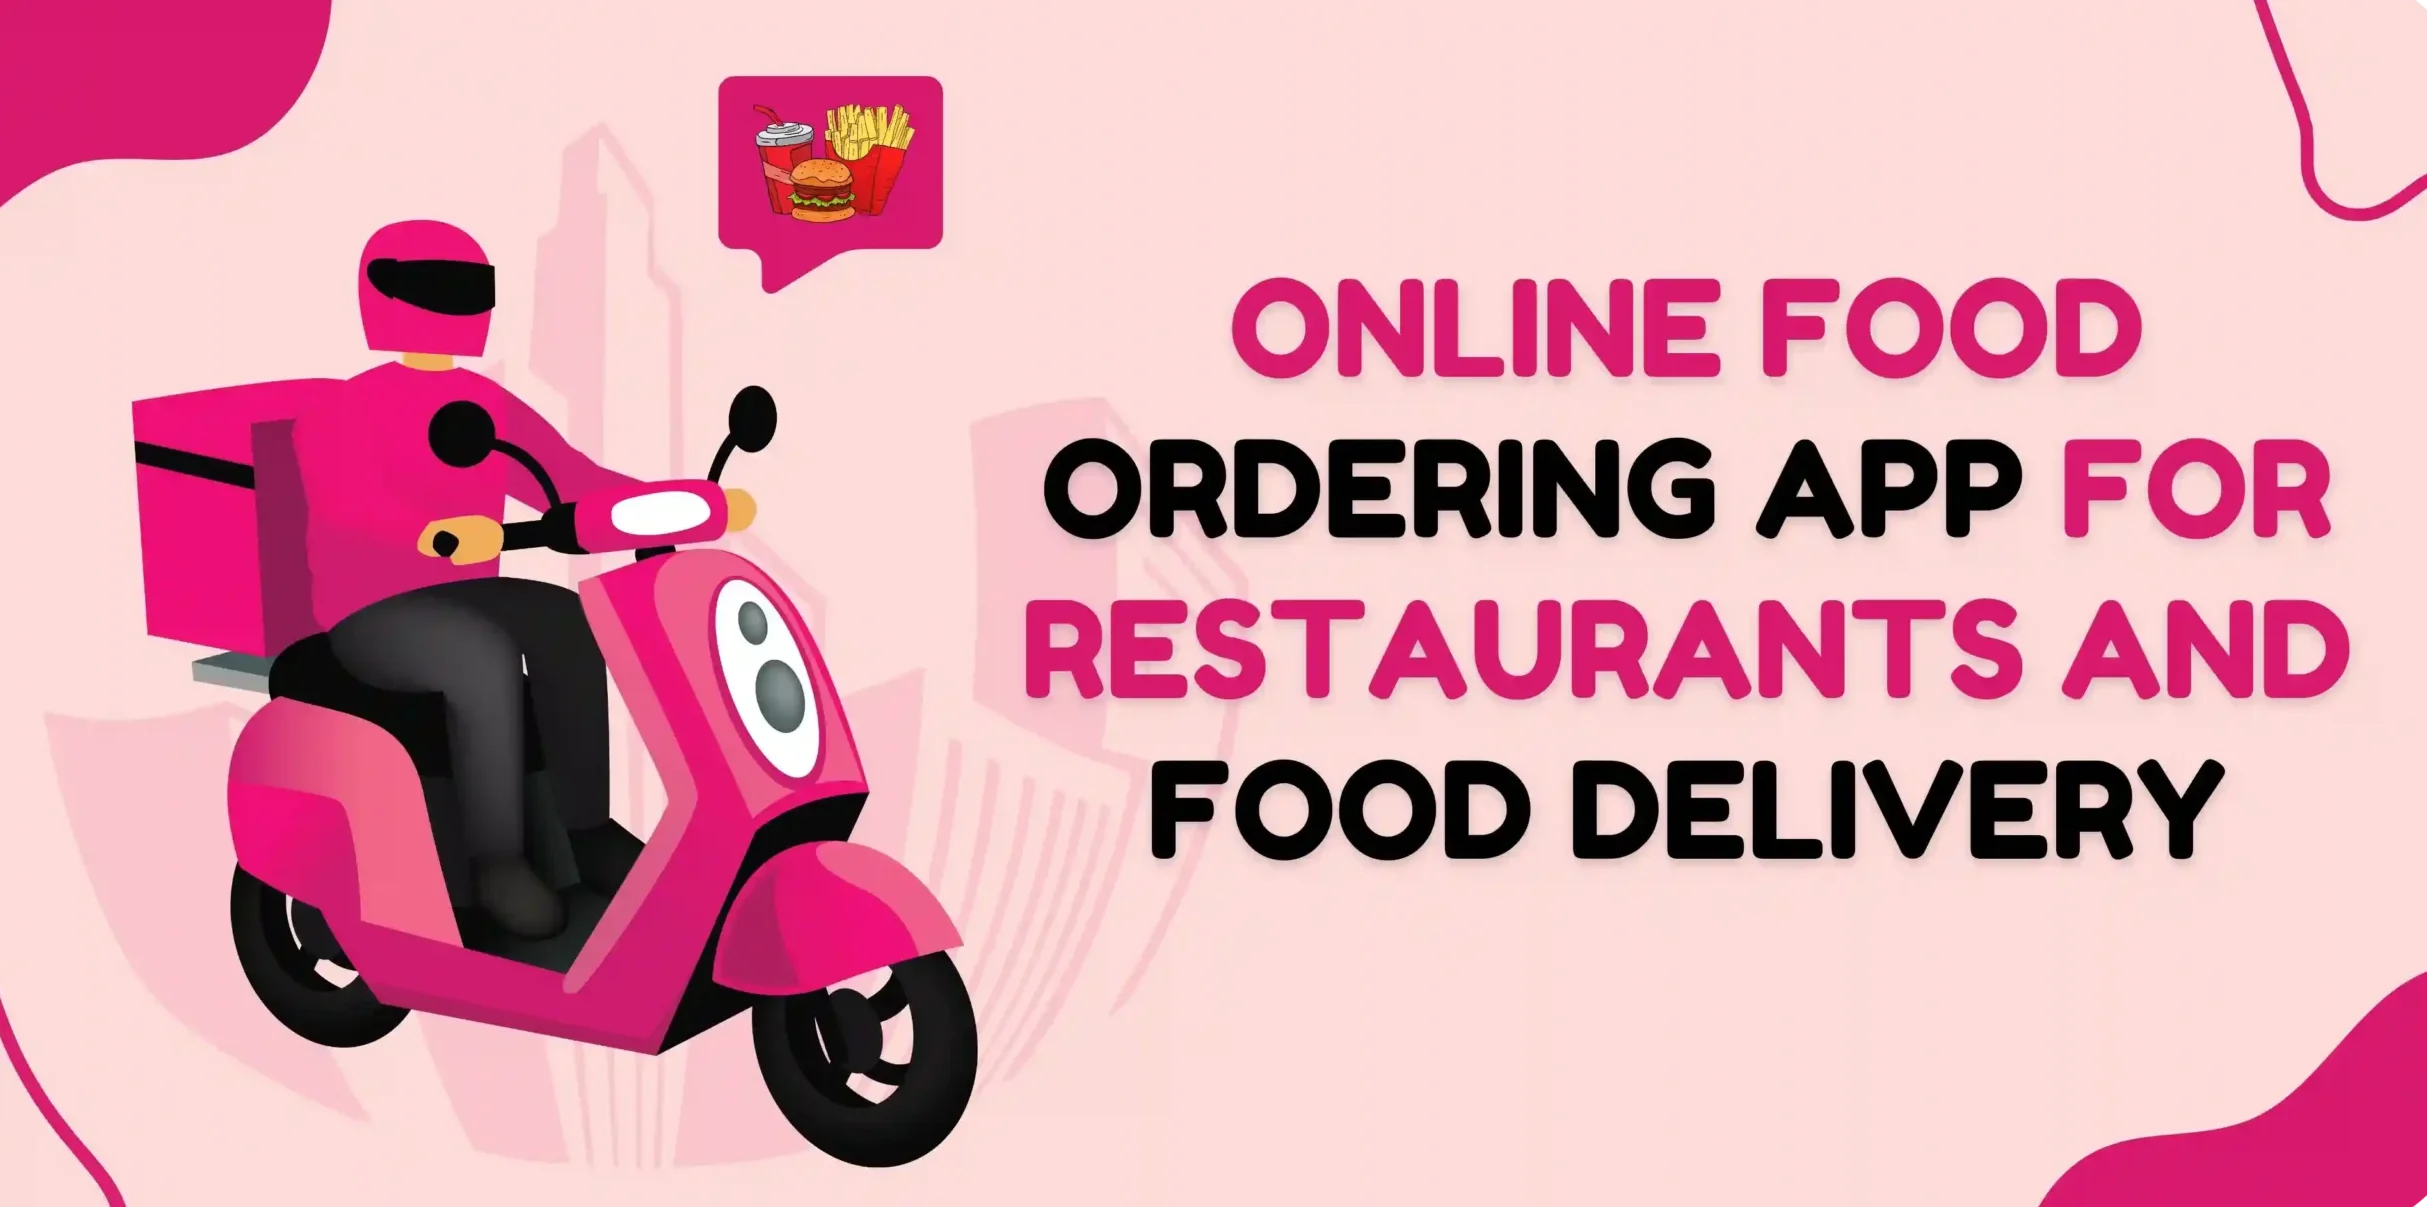 Online-Food-Ordering-App-for-Restaurants-and-Food-Delivery